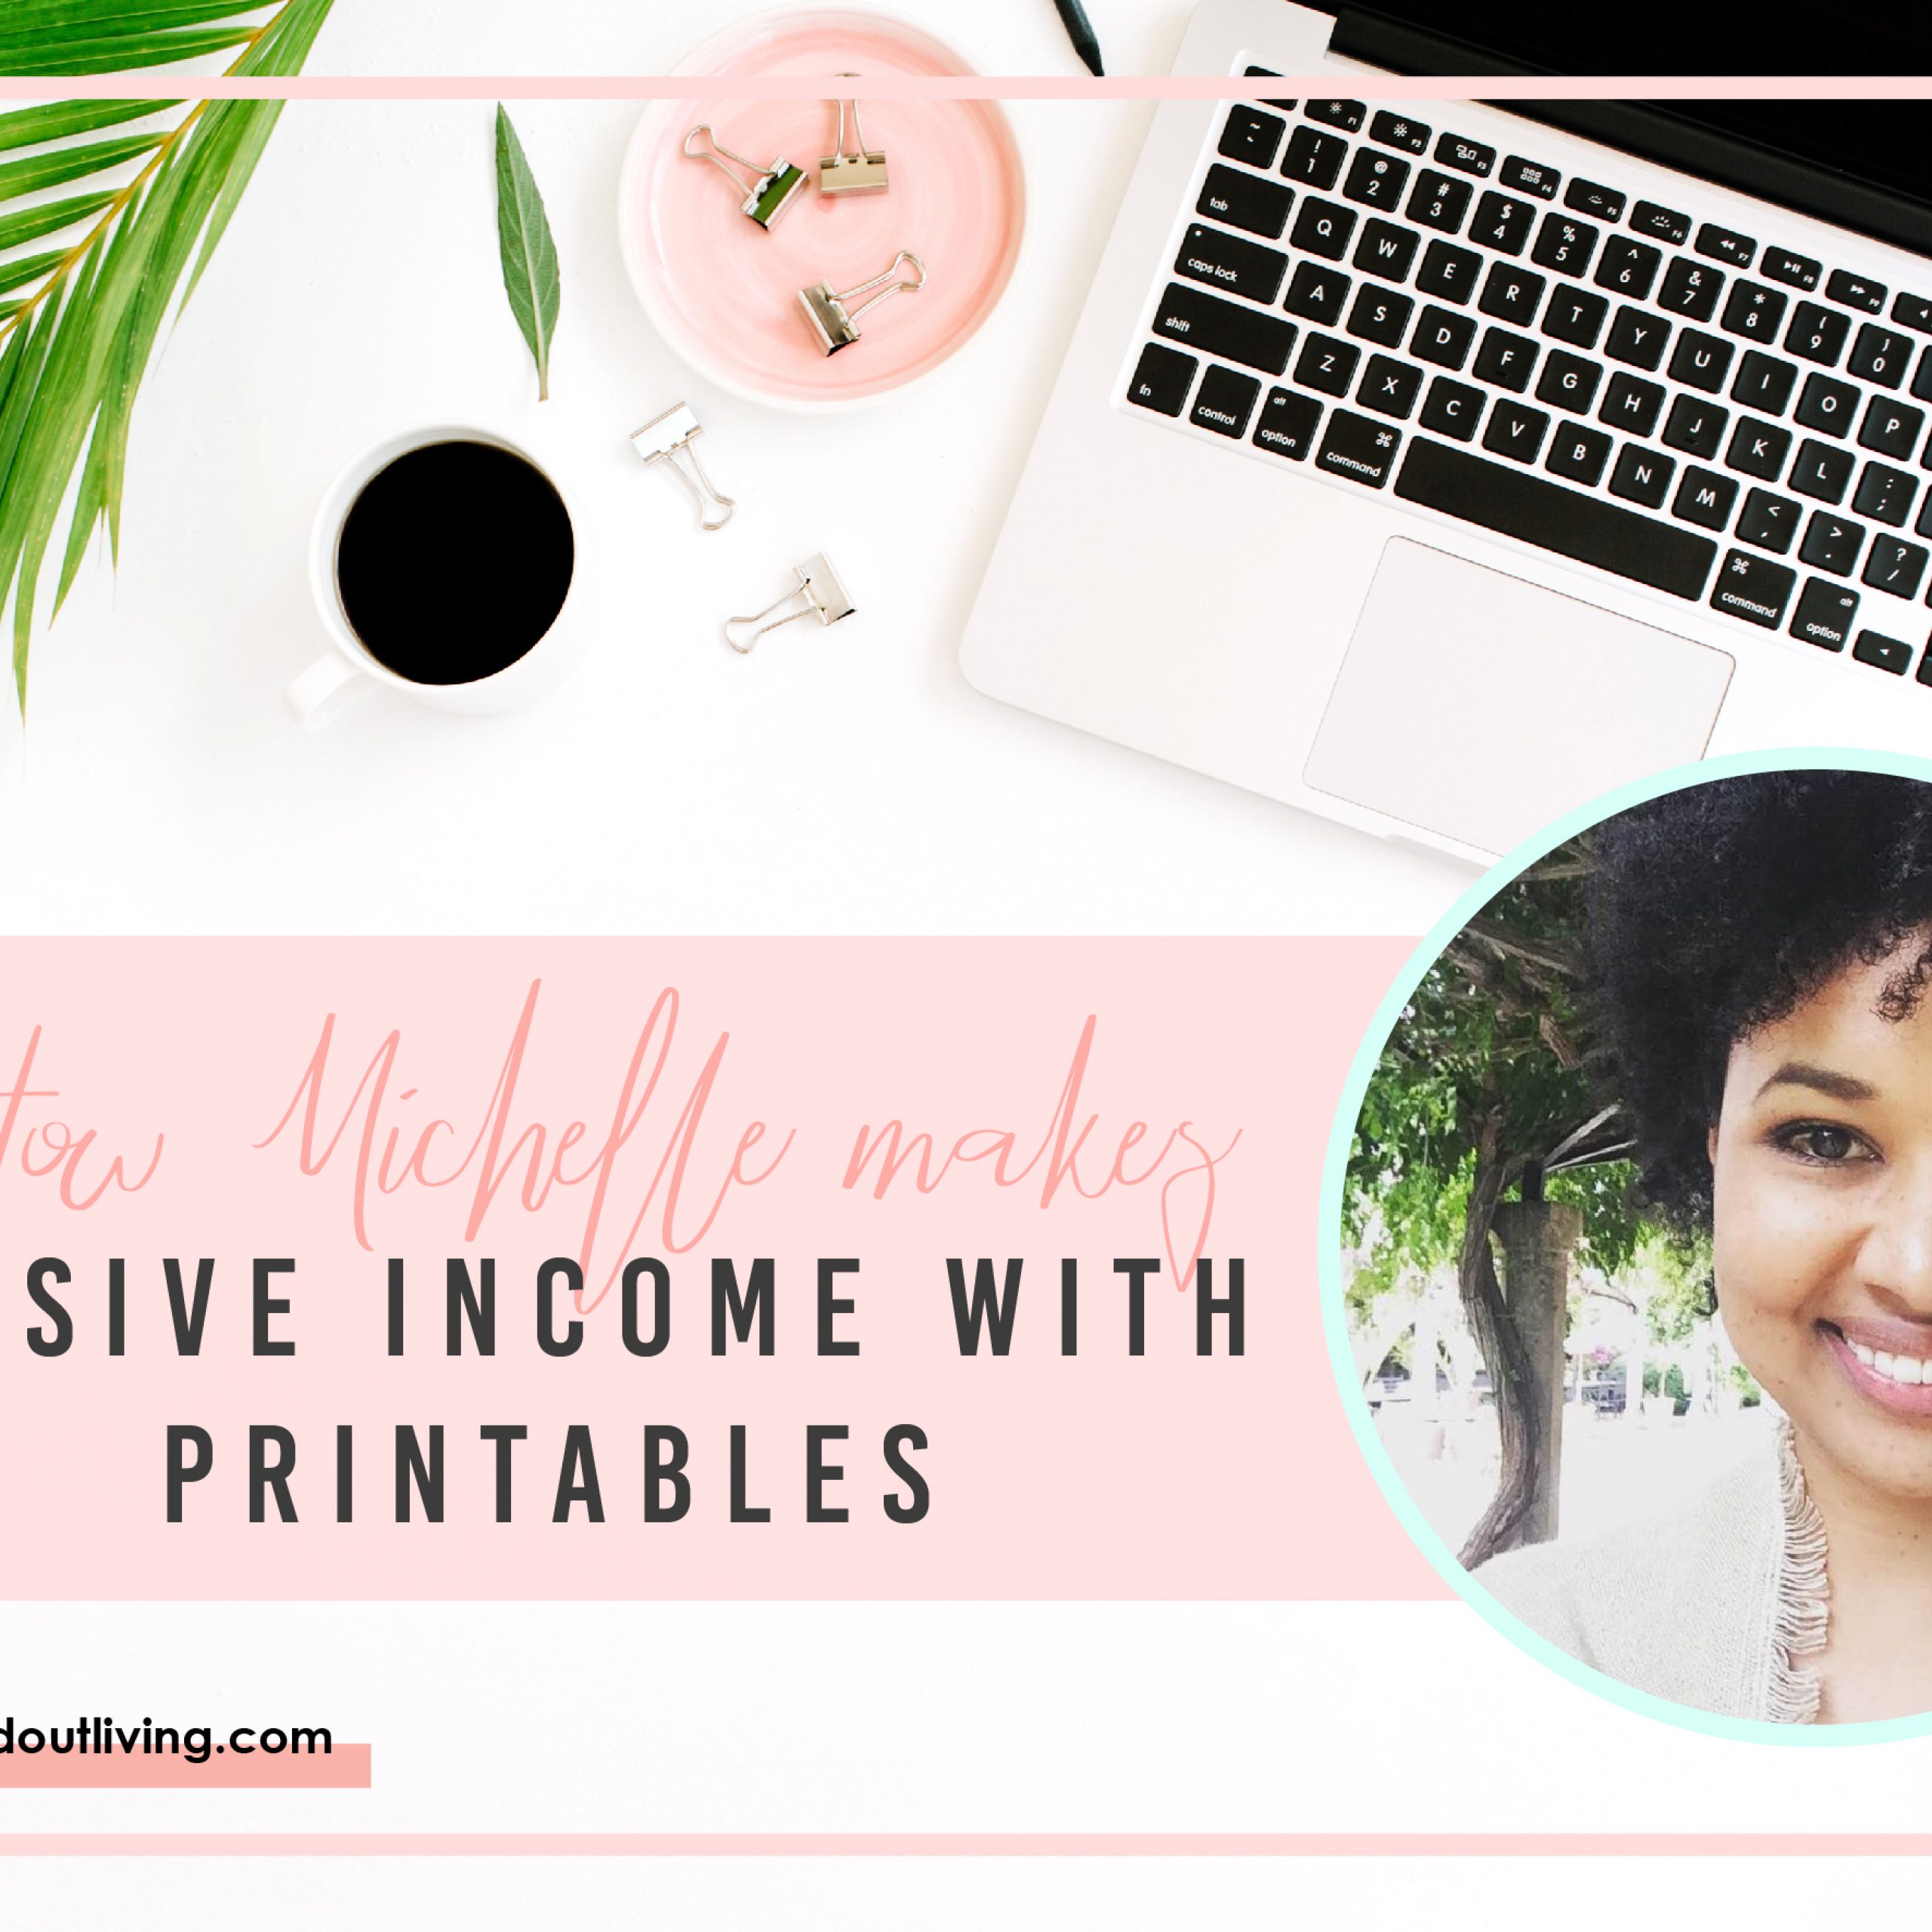 How Michelle makes money online by selling printables on Etsy - How you can do the same too! Make money selling printables on etsy - make sell printables etsy - make money selling printables etsy - create and sell printables